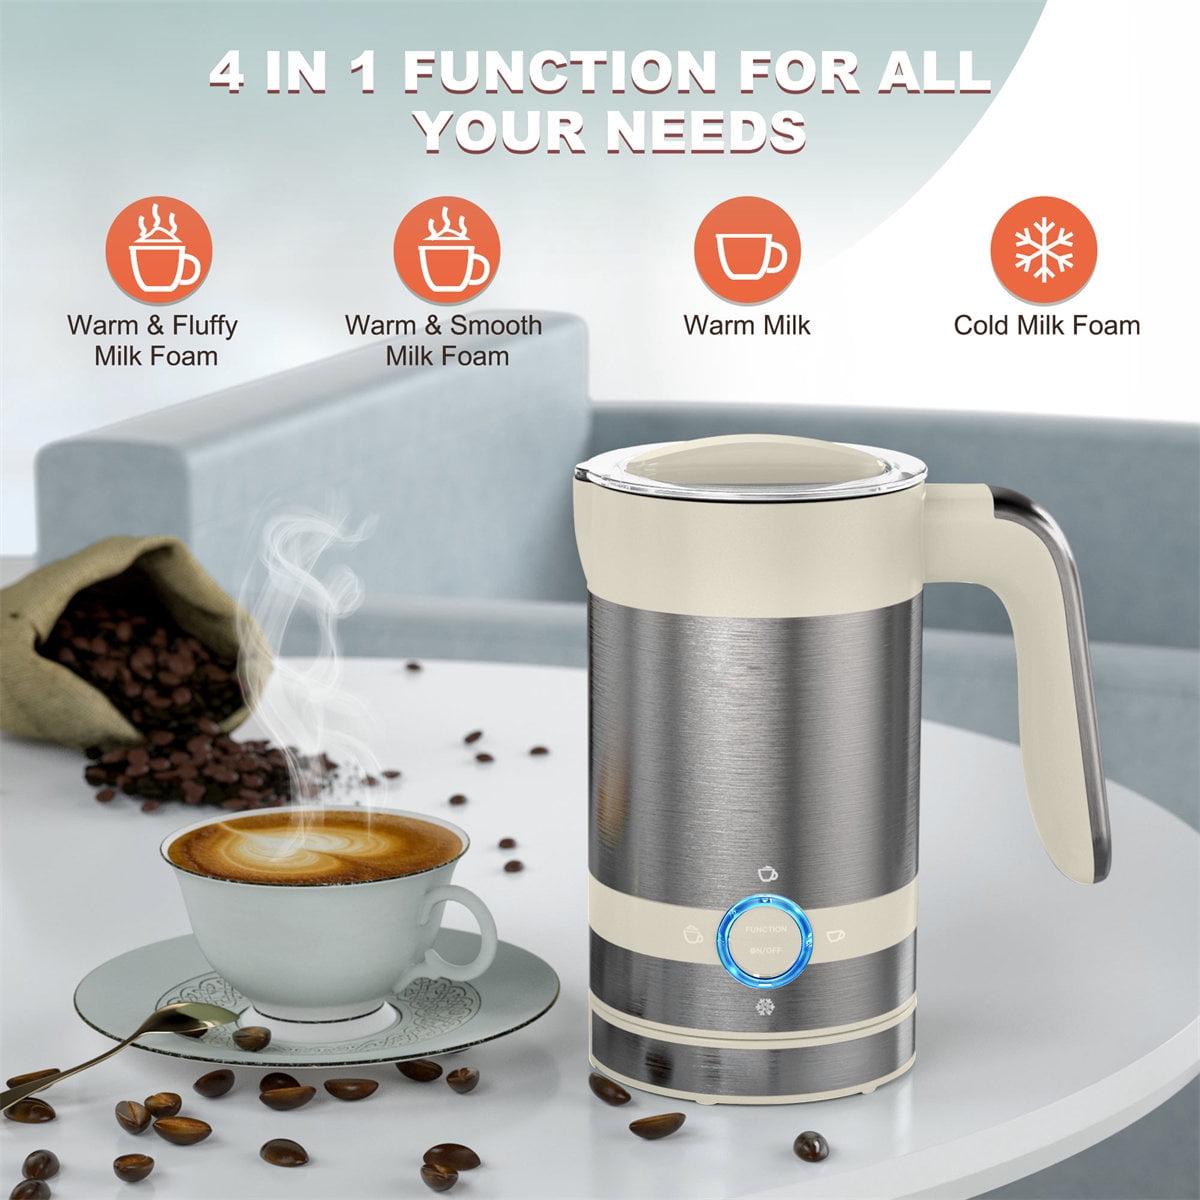 BEICHEN Milk Frother and Steamer - 4-in-1 Electric Milk Frother Hot & Cold  Foam Maker 8oz/240ml, Warm and Cold Foam Maker and Milk Warmer for Latte